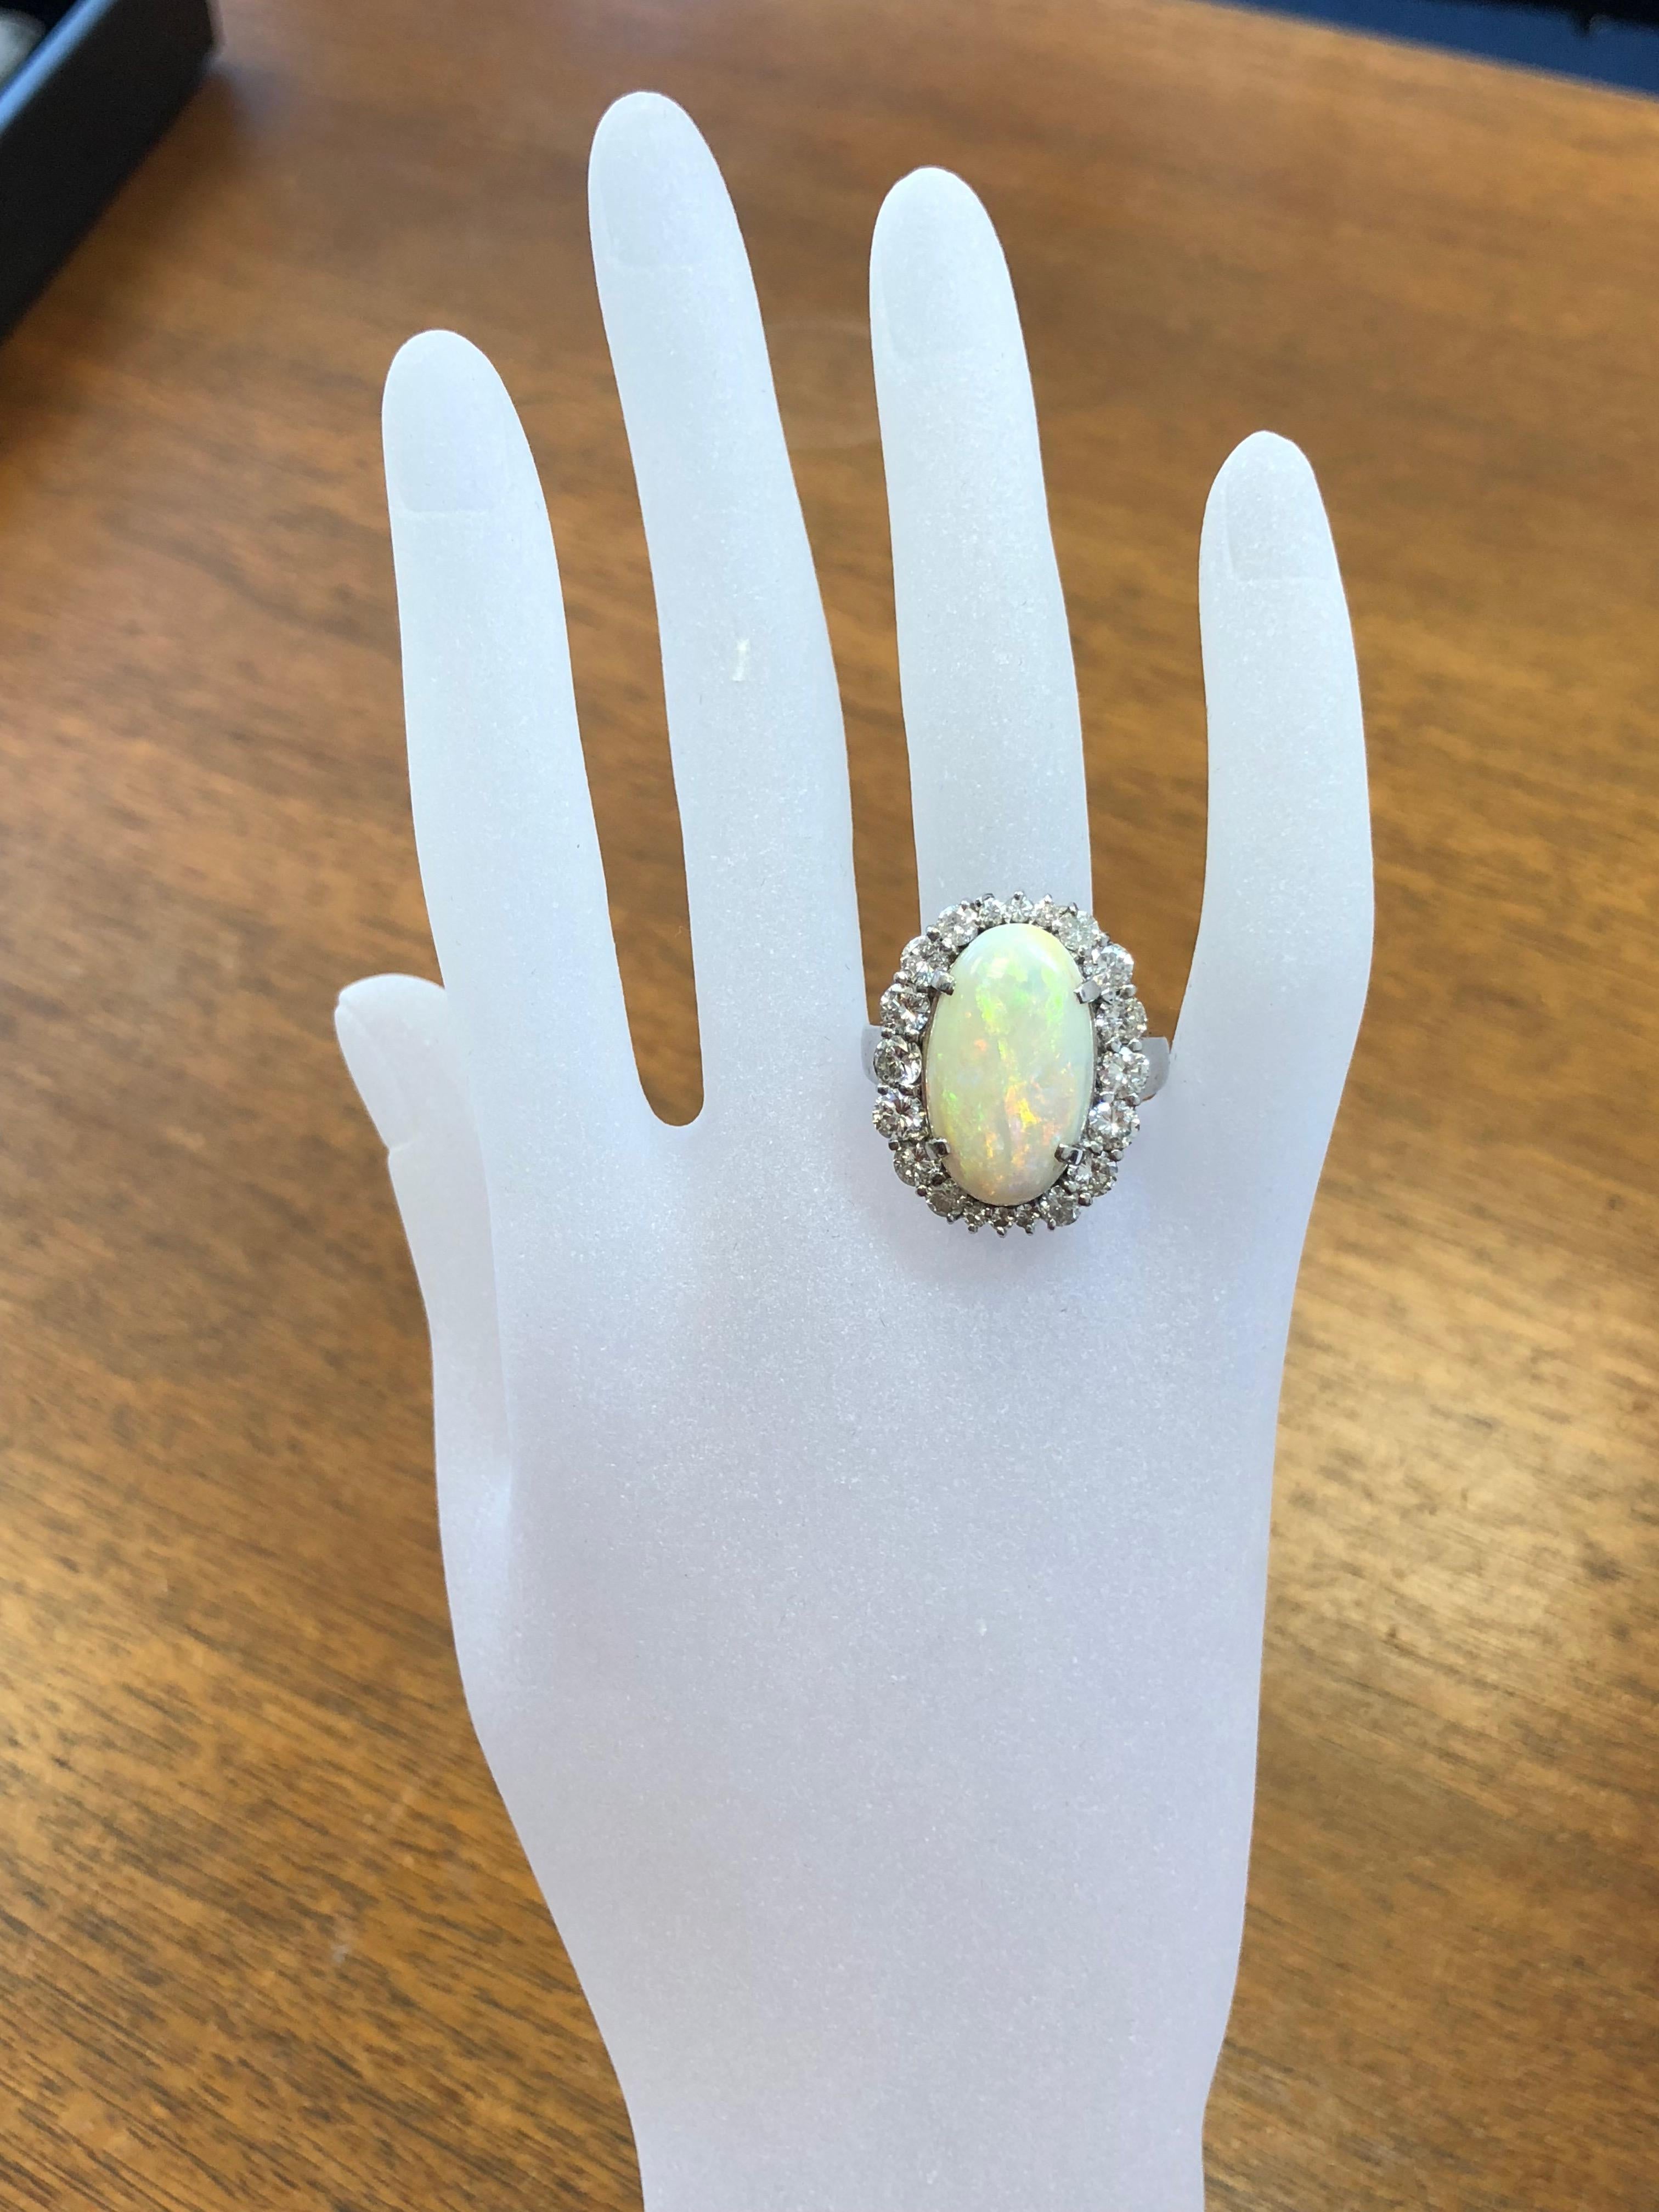 Beautiful 8 carat estate oval opal surrounded by 2.36 carats of white diamonds.  The opal has stunning hues of green, orange, and gold.  The white diamonds are good quality and lustrous.  The ring is a size 9.25 in platinum.  This is the perfect